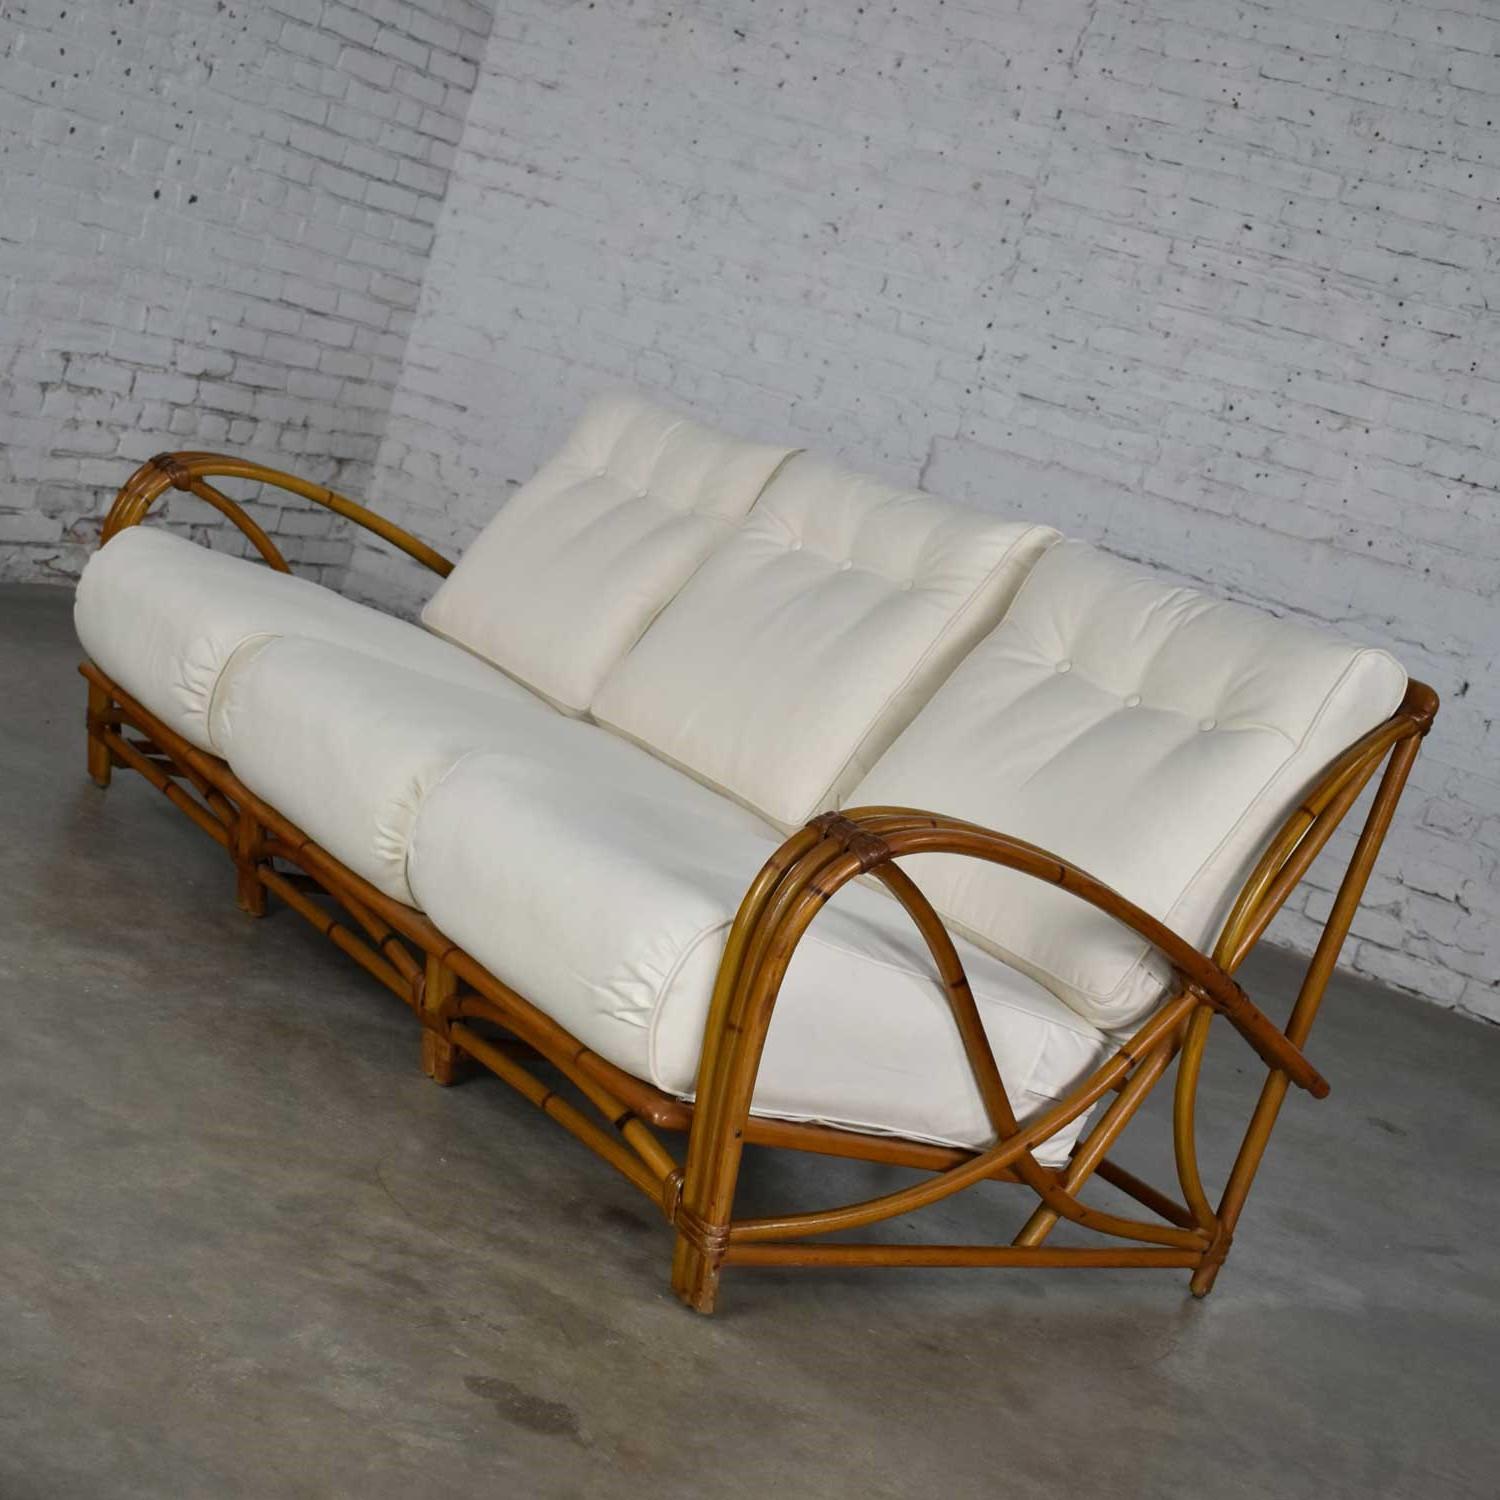 20th Century Vintage Heywood Wakefield Rattan Sofa New Off-White Canvas Upholstery